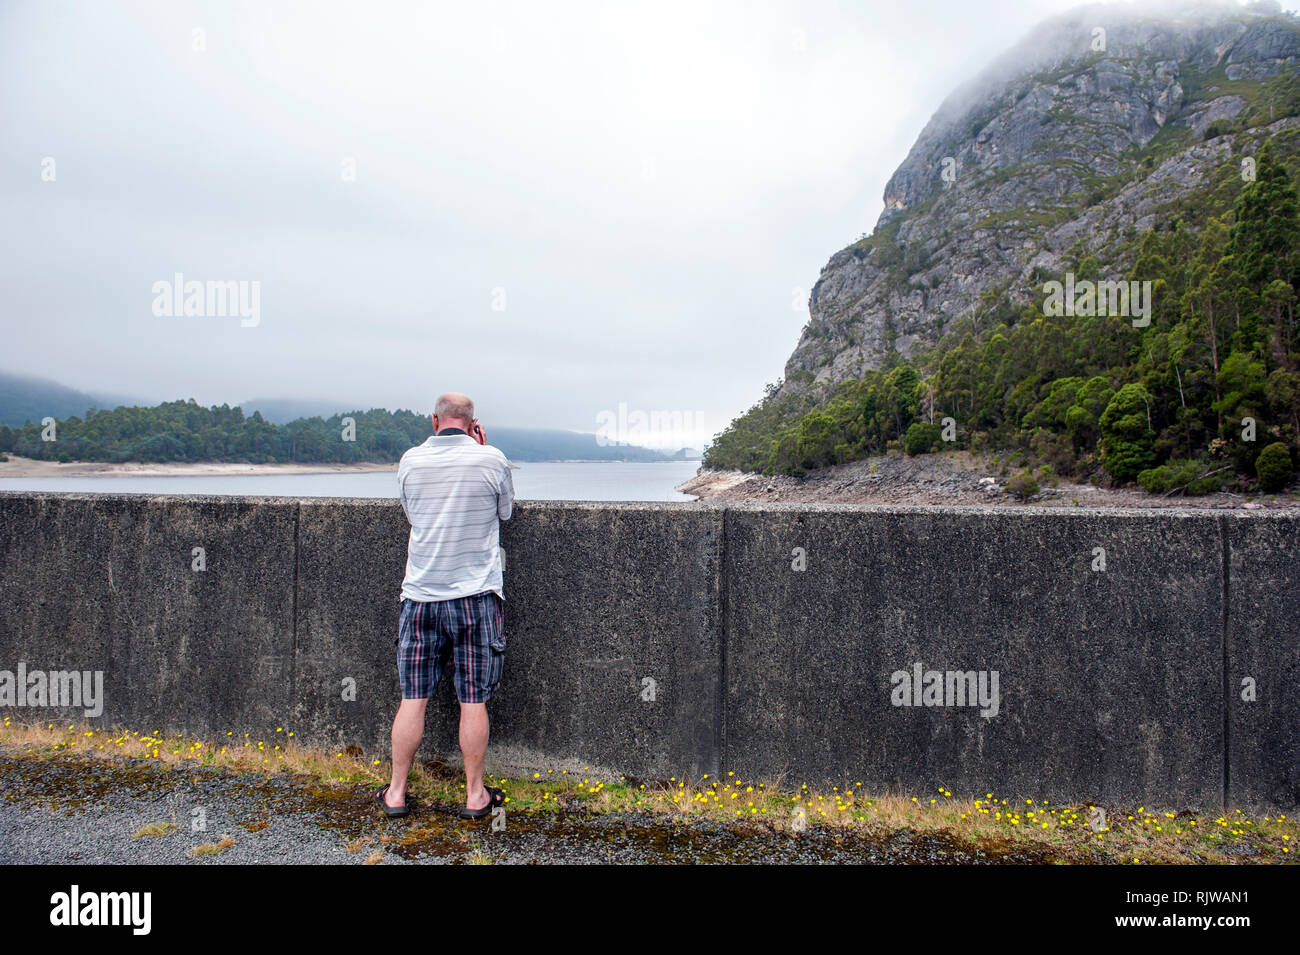 A tourist taking a photograph of Lake Mackintosh, a reservoir forming part of the Pieman hydro electric scheme near Tullah in Tasmania. Stock Photo